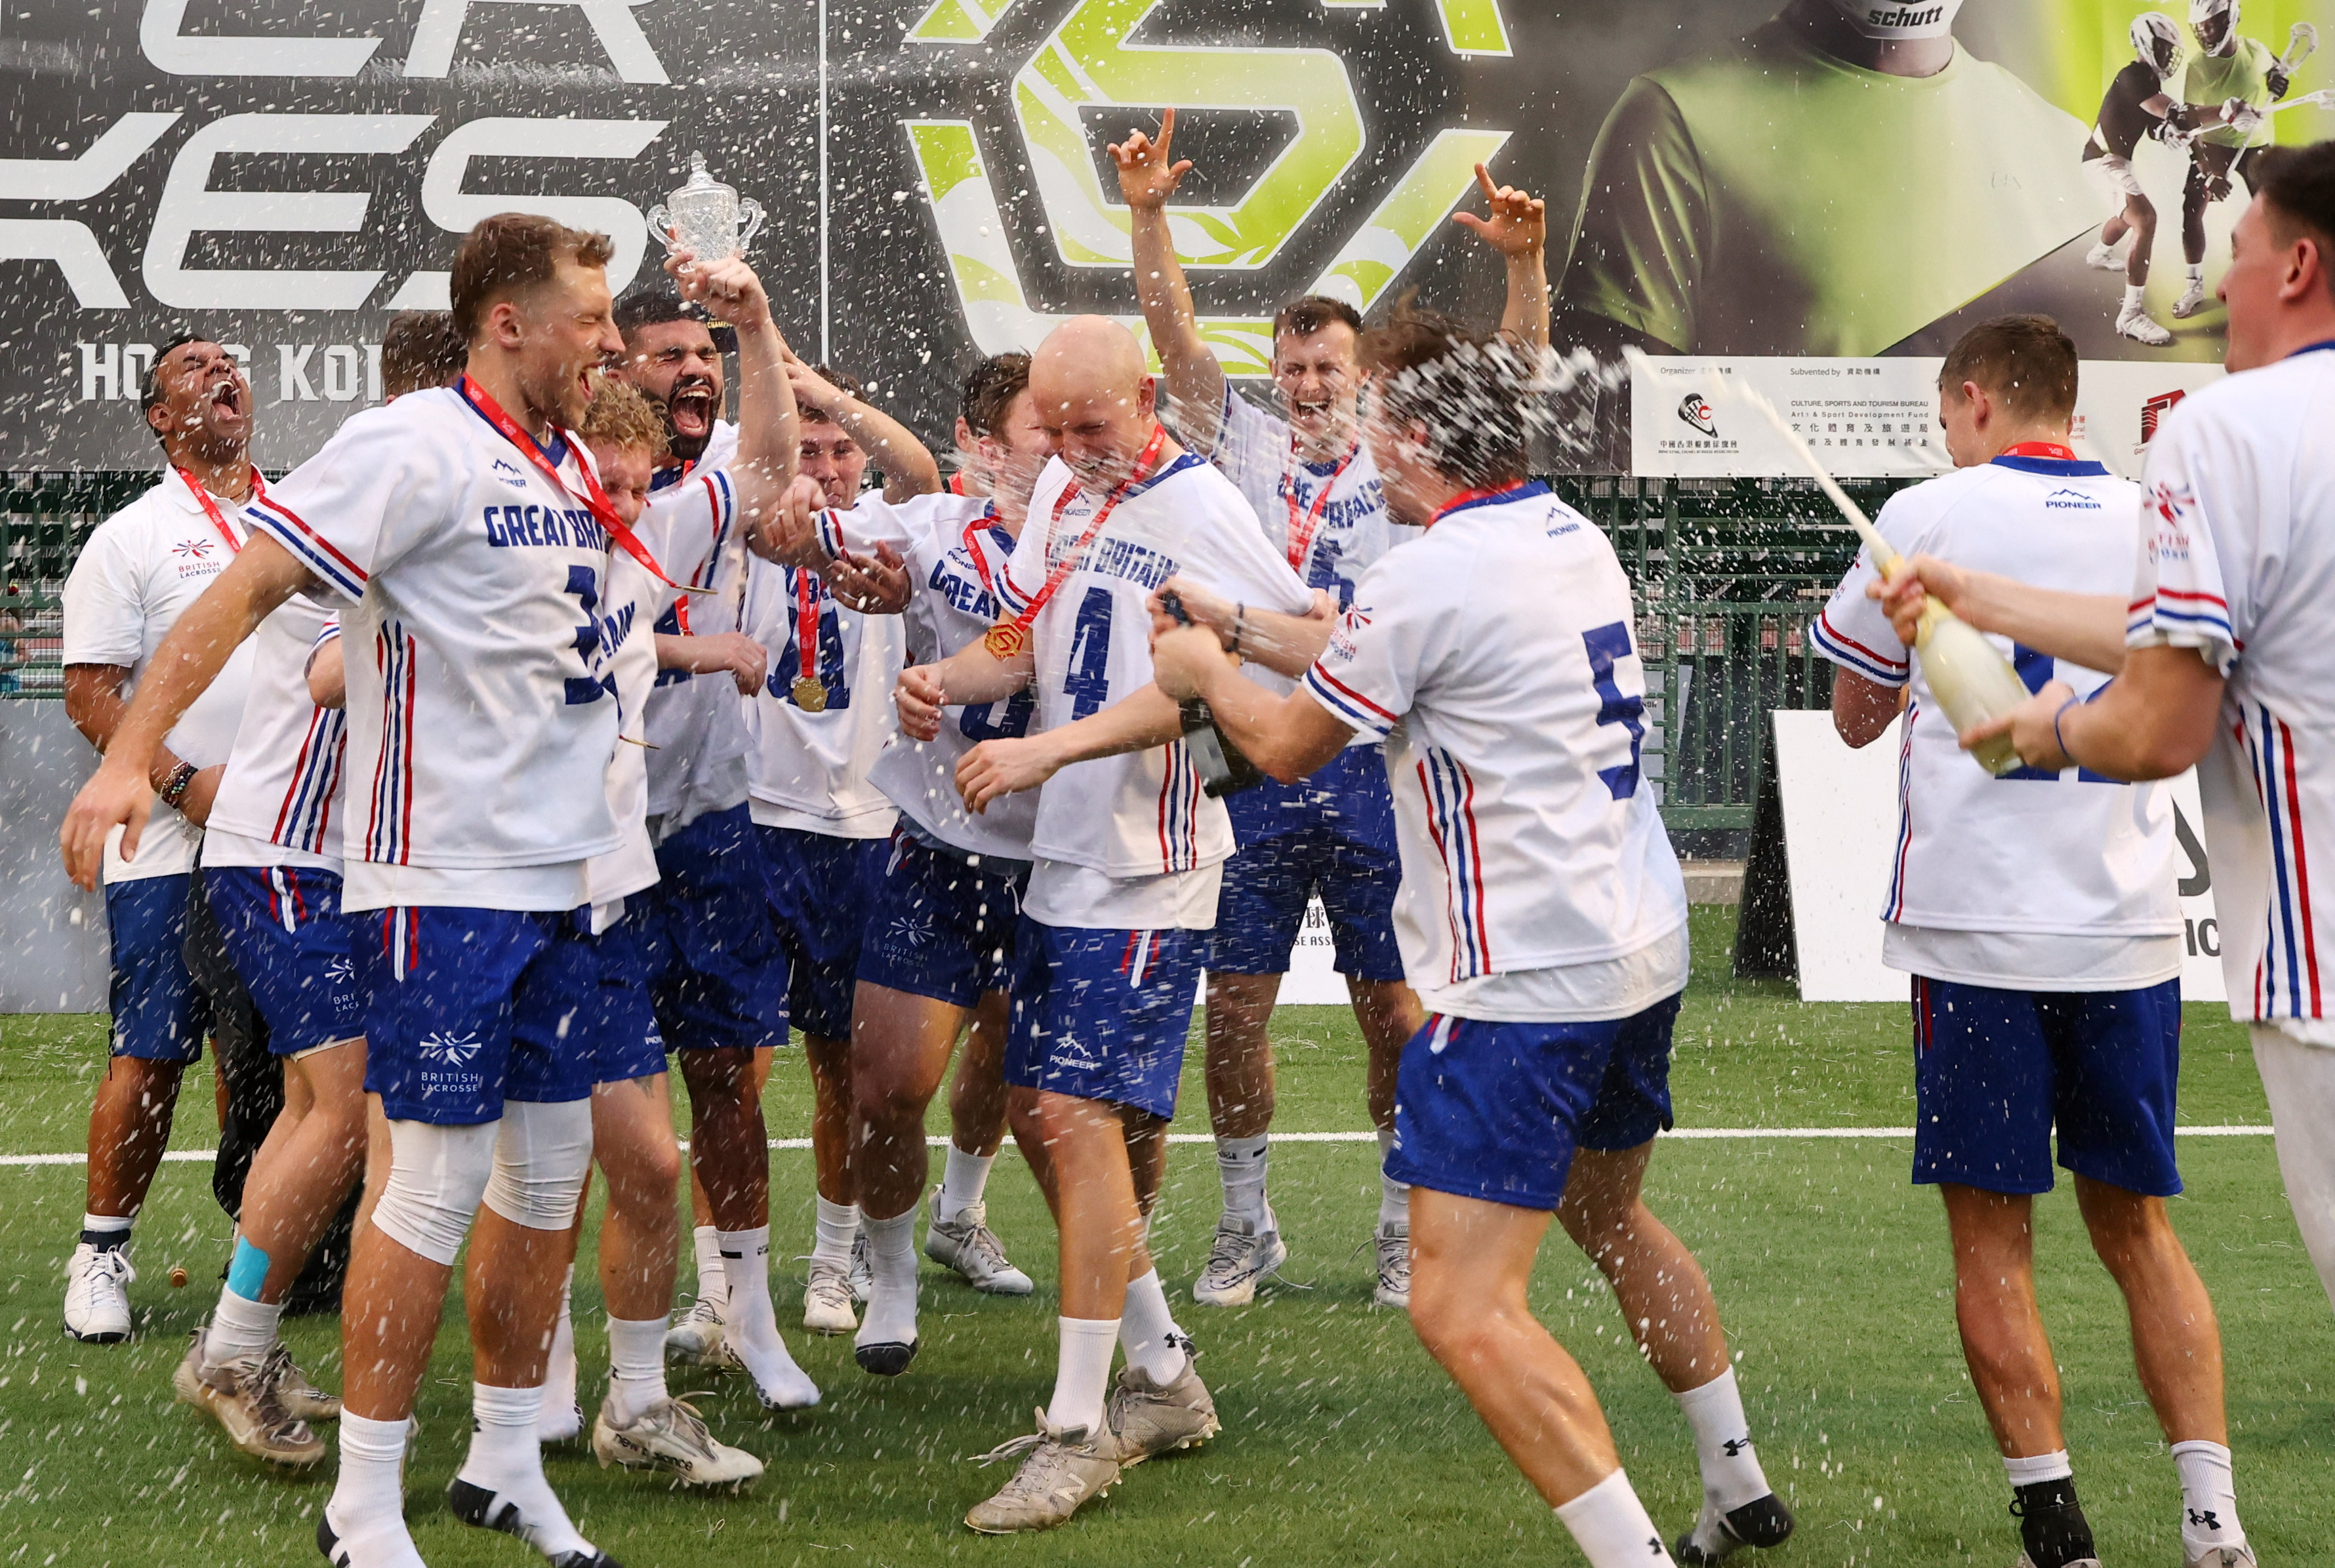 Great Britain’s men celebrate winning their tournament at the World Lacrosse Super Sixes in Hong Kong. Photo: Dickson Lee